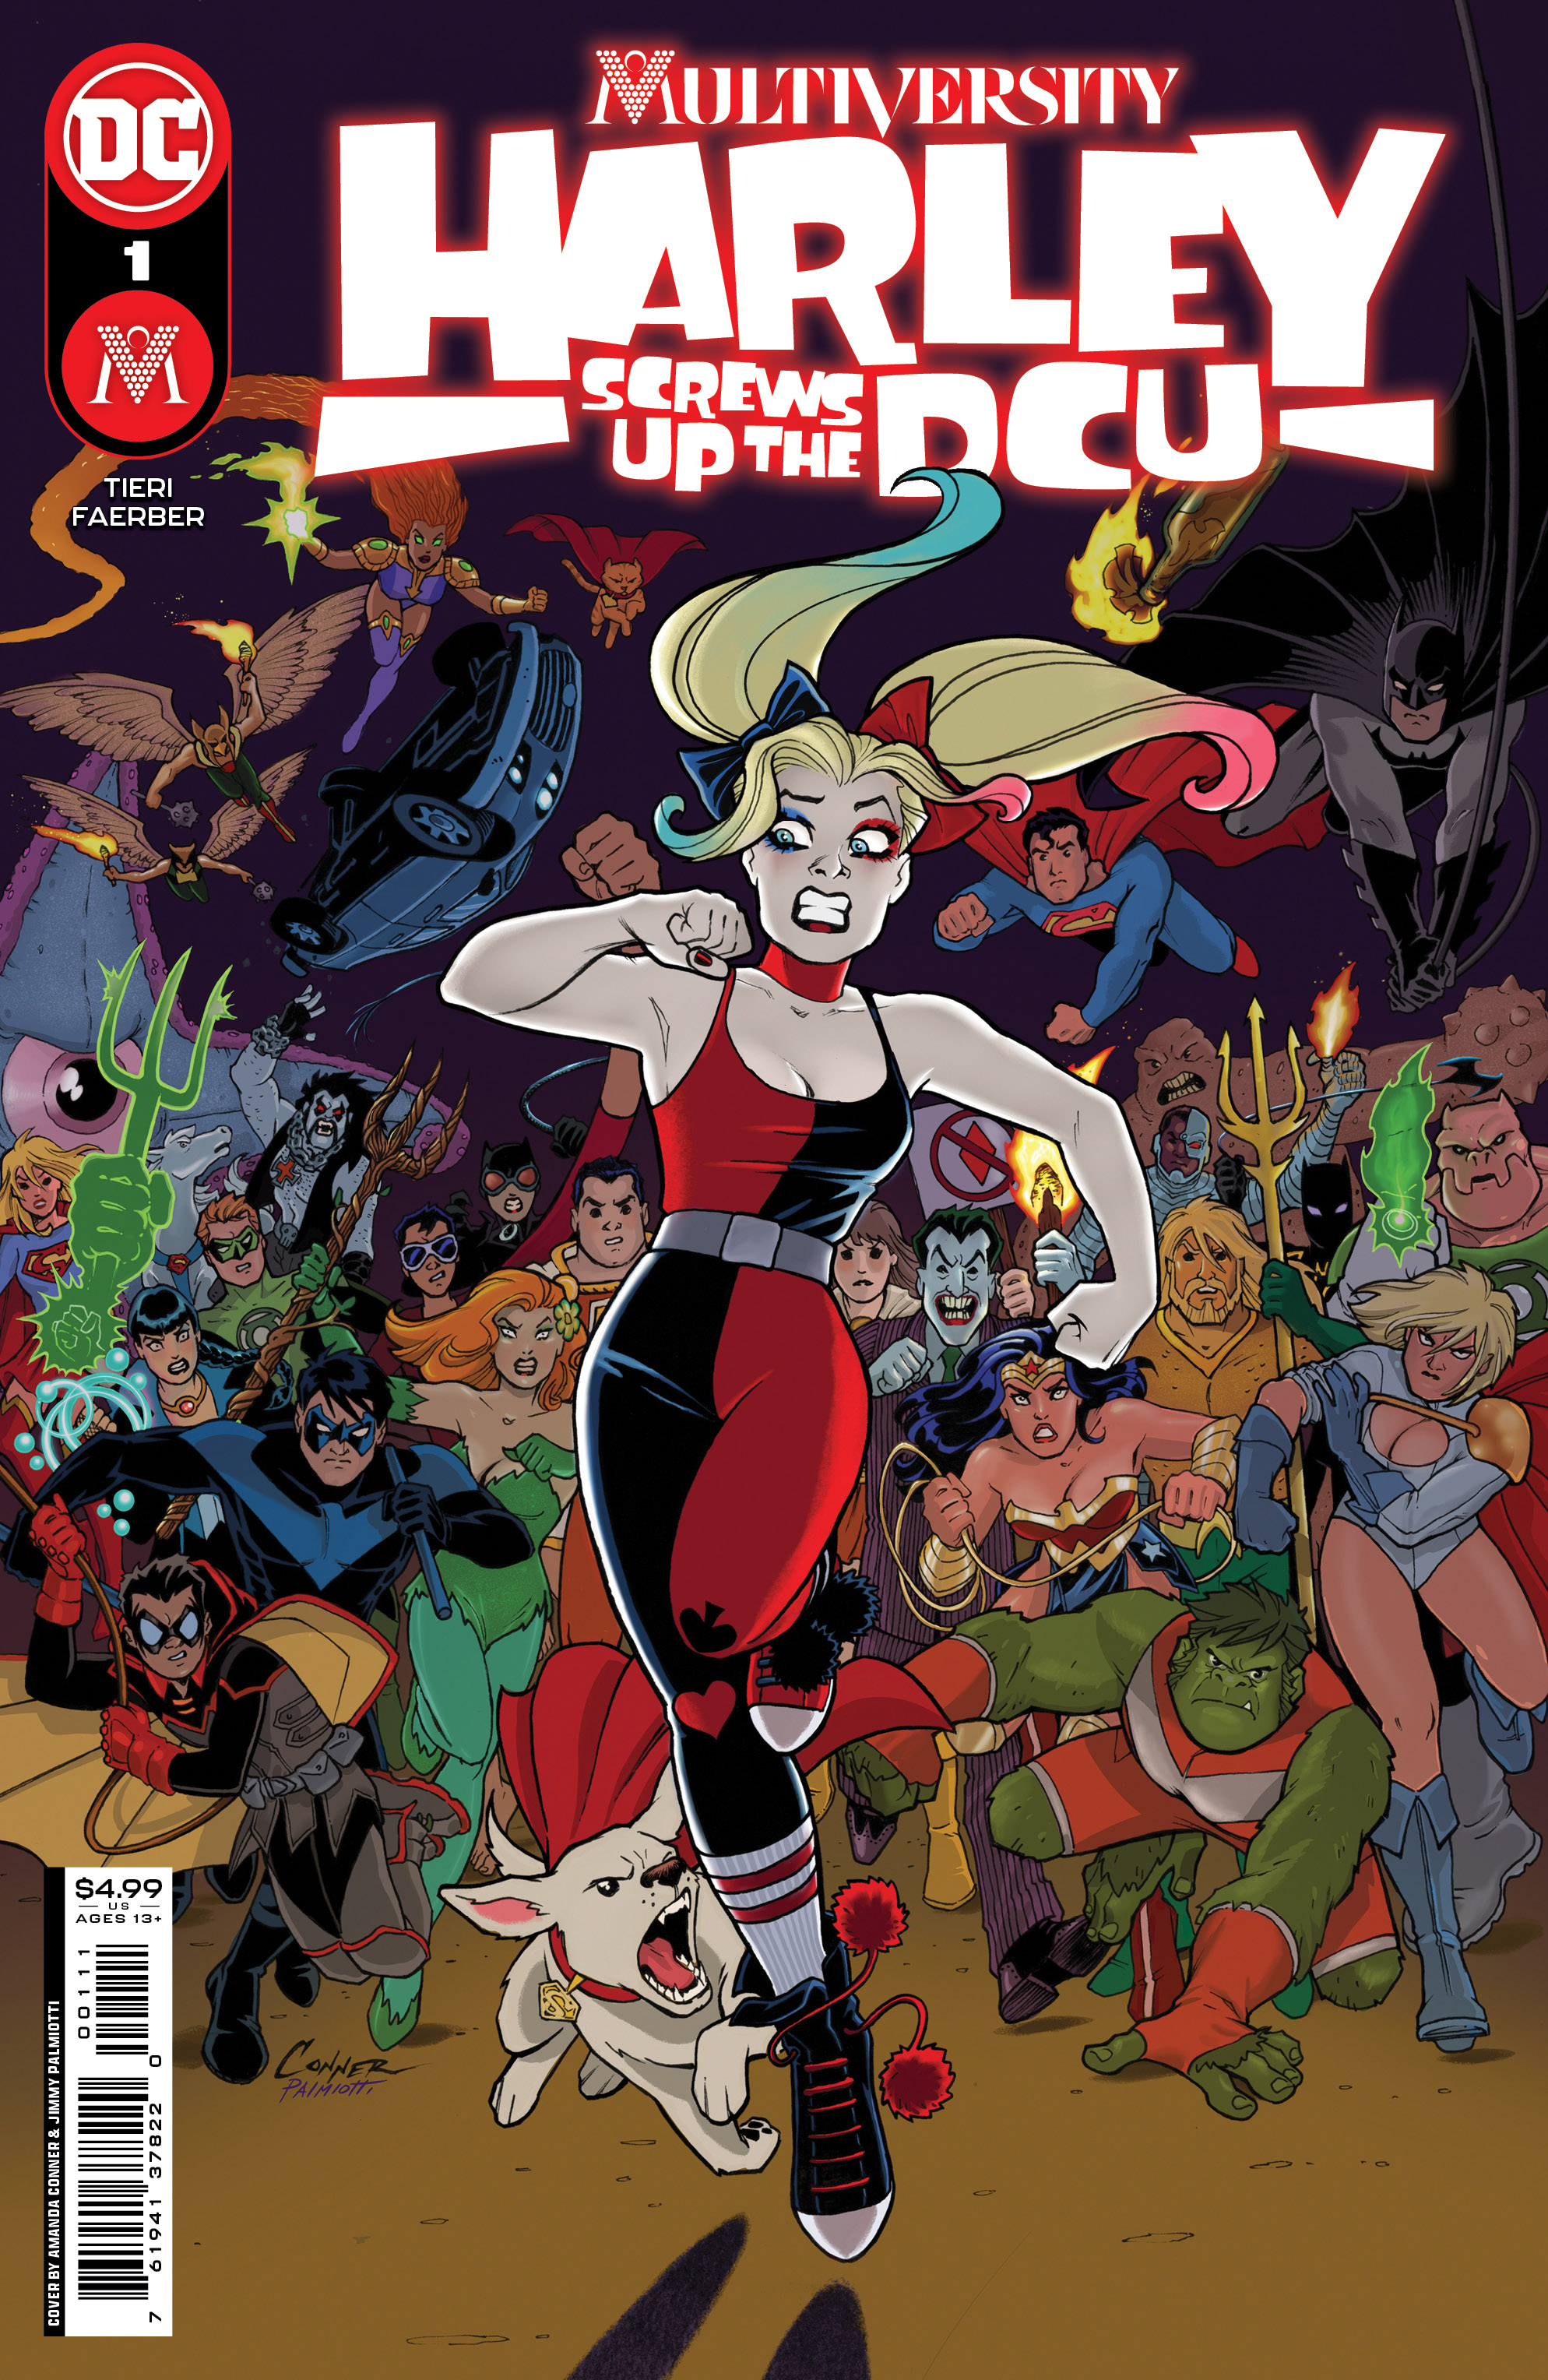 Multiversity Harley Screws Up The DCU #1 Cover A Amanda Conner (Of 6)